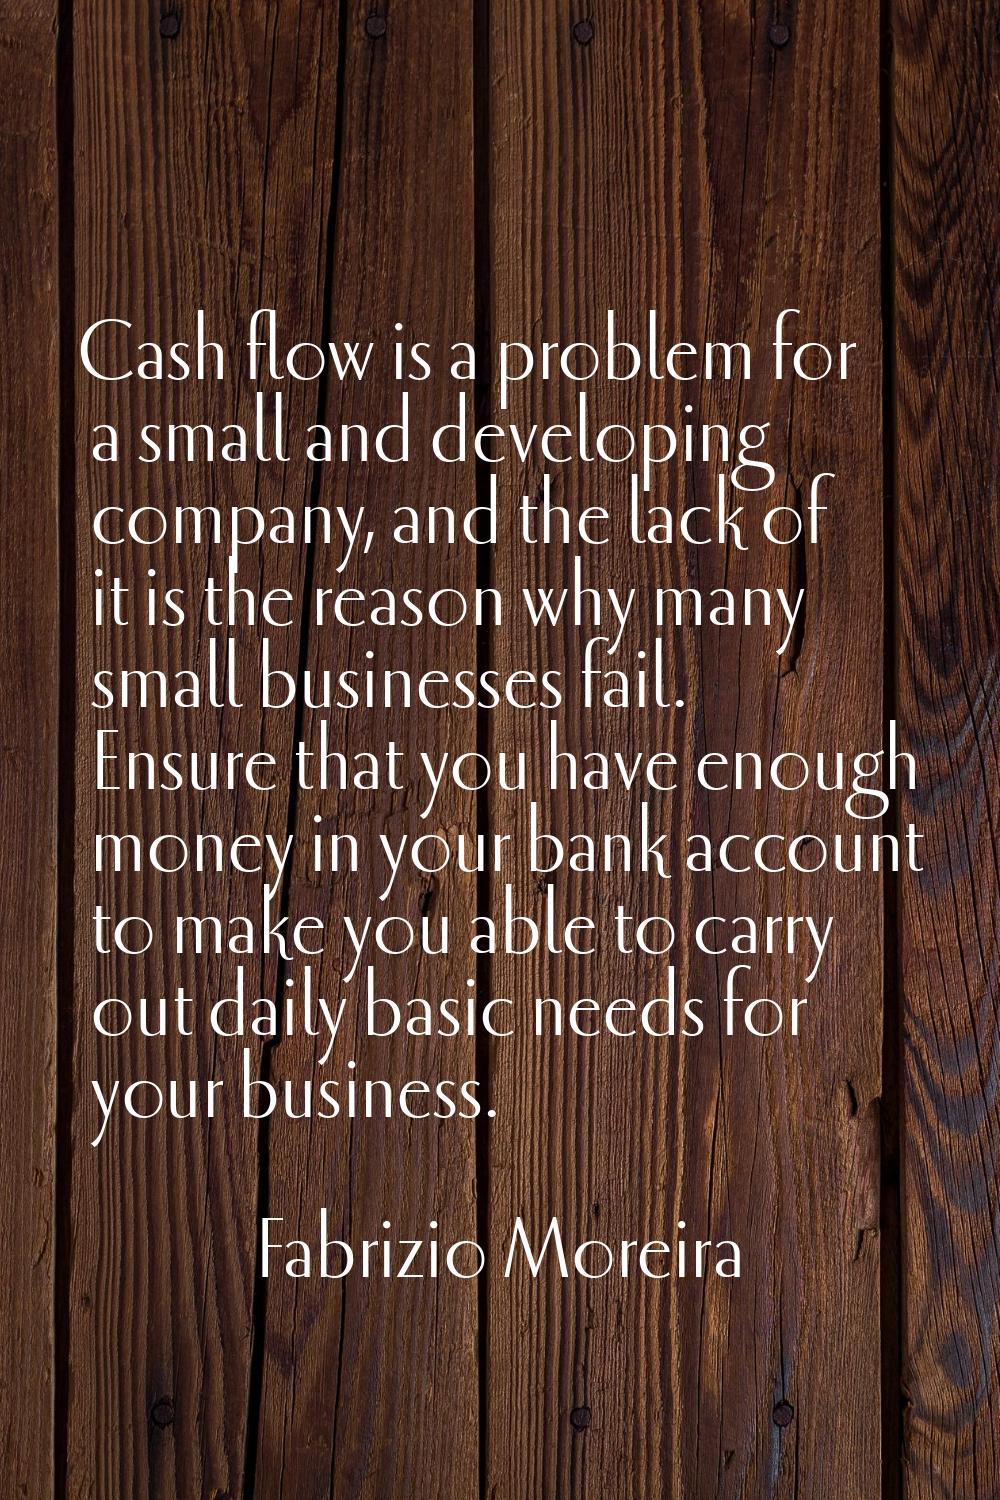 Cash flow is a problem for a small and developing company, and the lack of it is the reason why man